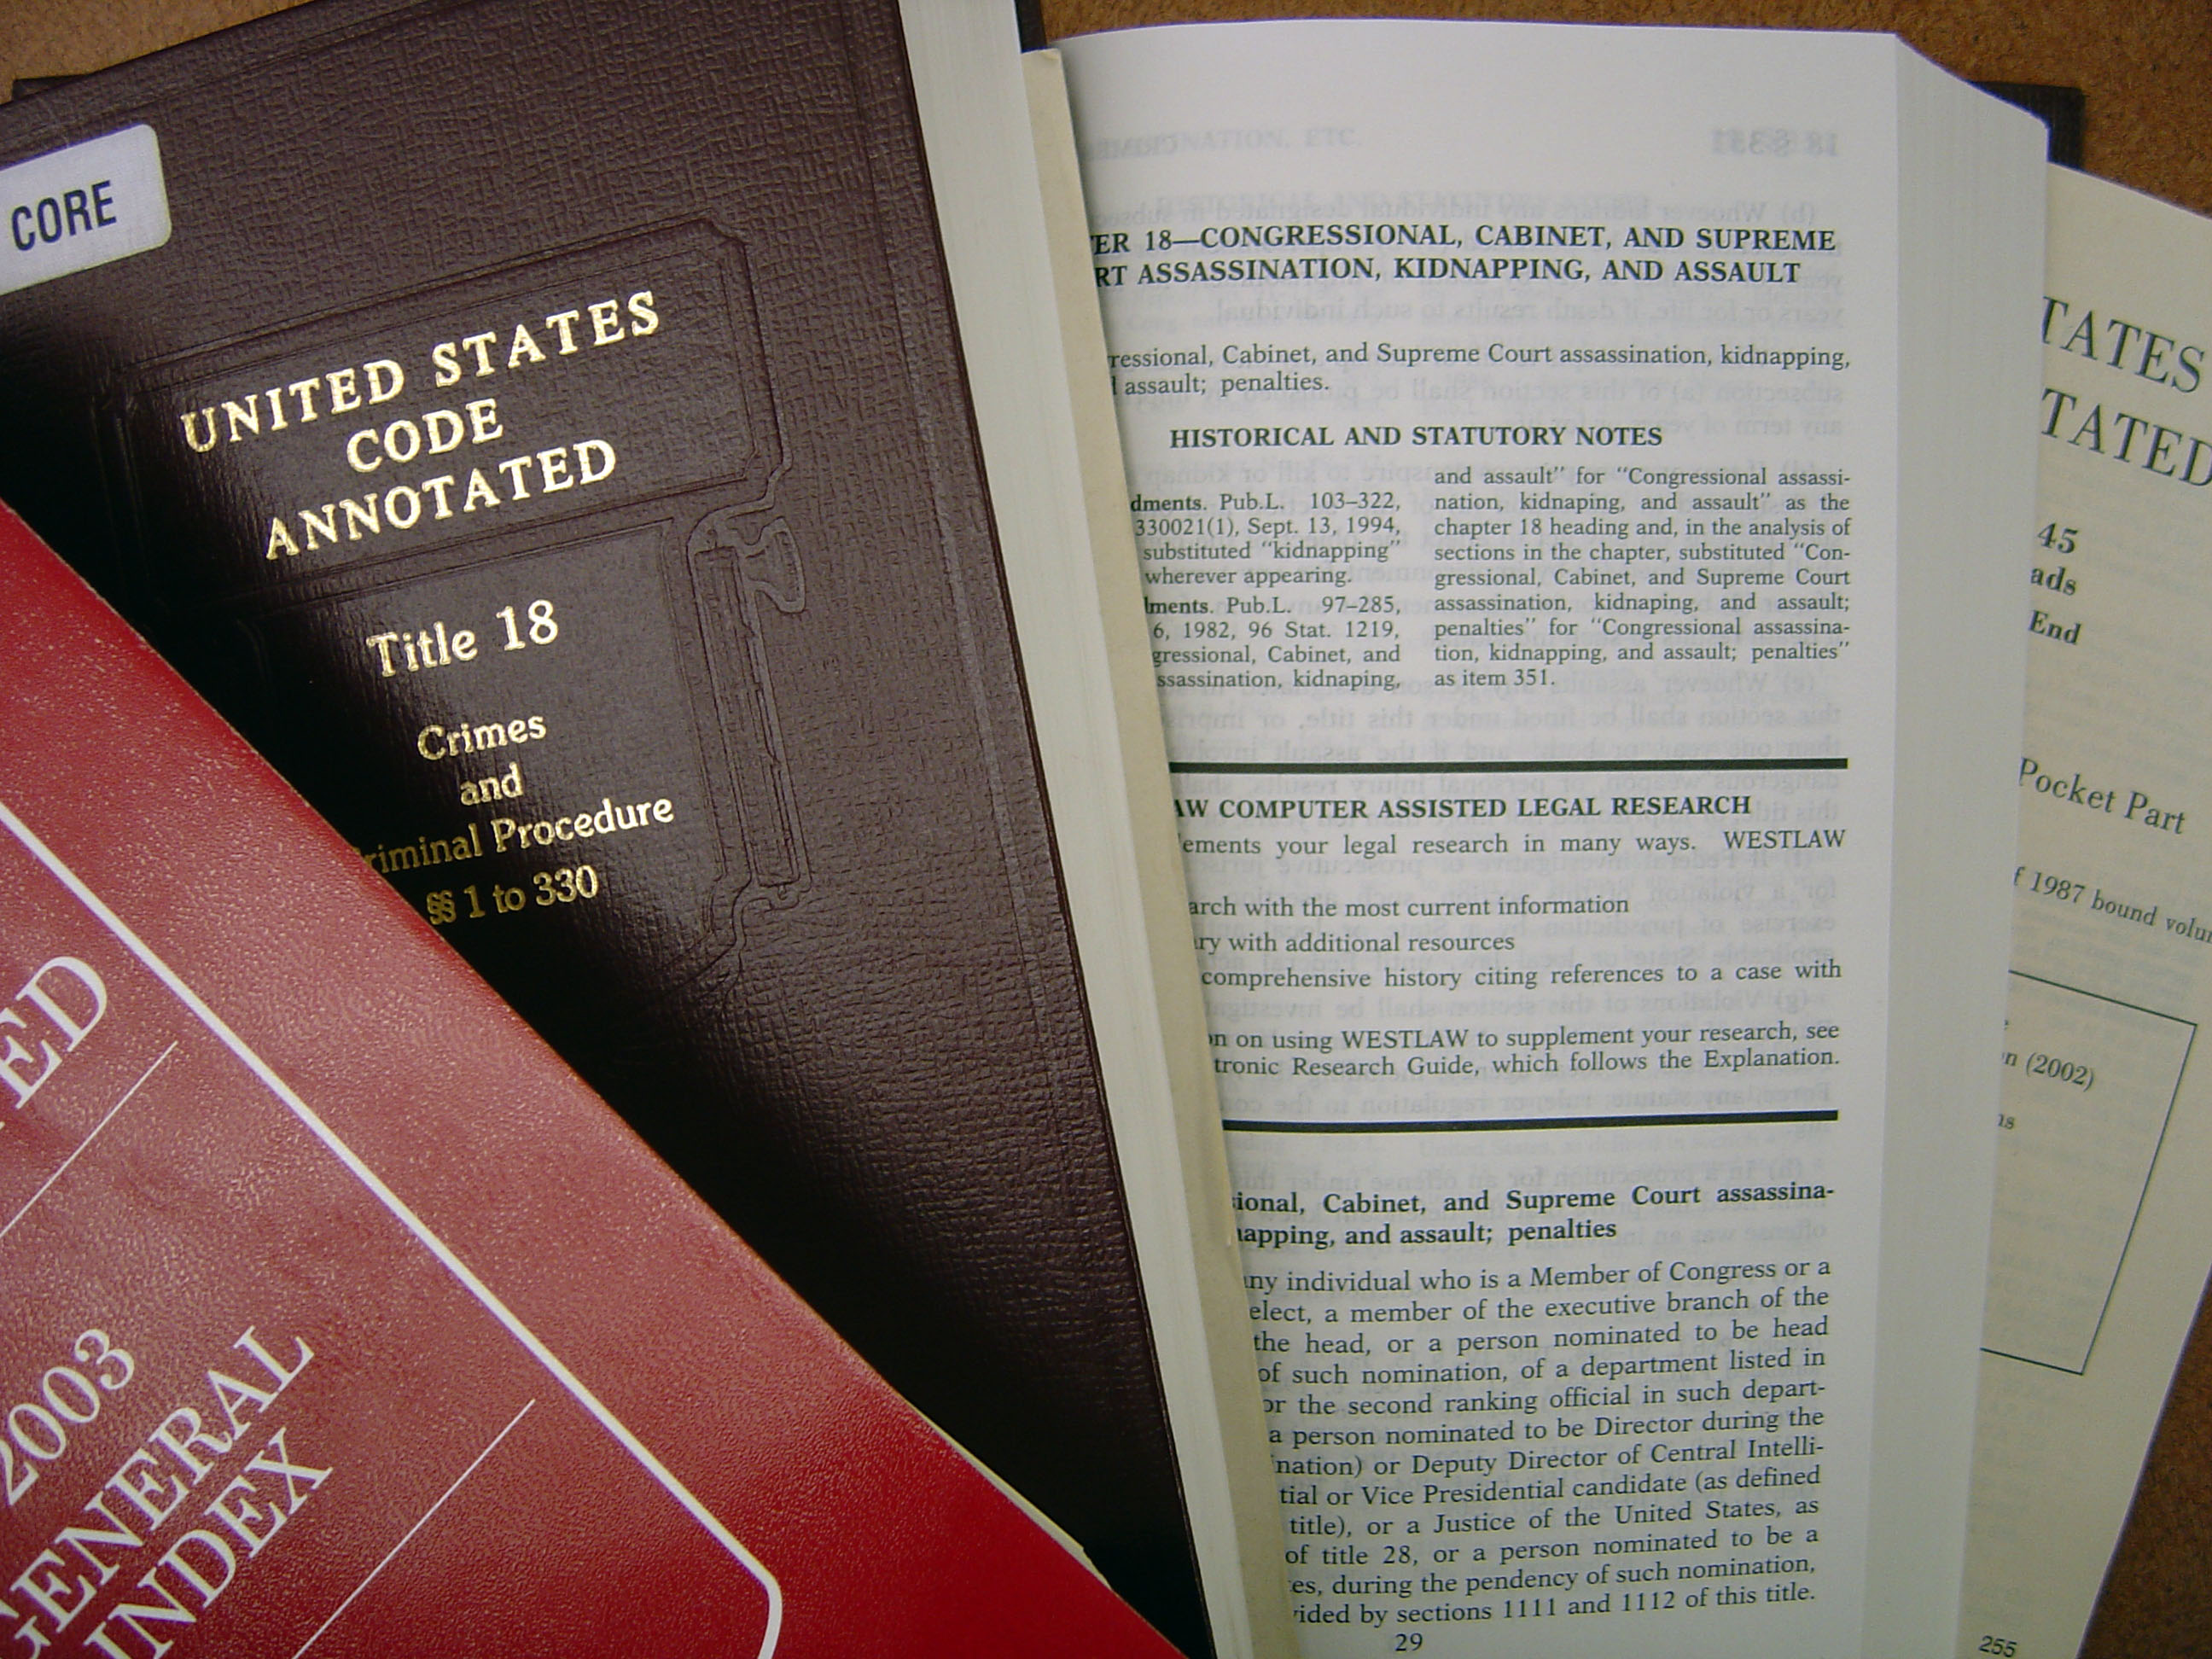 Law Library Bonus Pic: United States Code Annotated Index, Main Volume, and Pocket Part (from left to right)